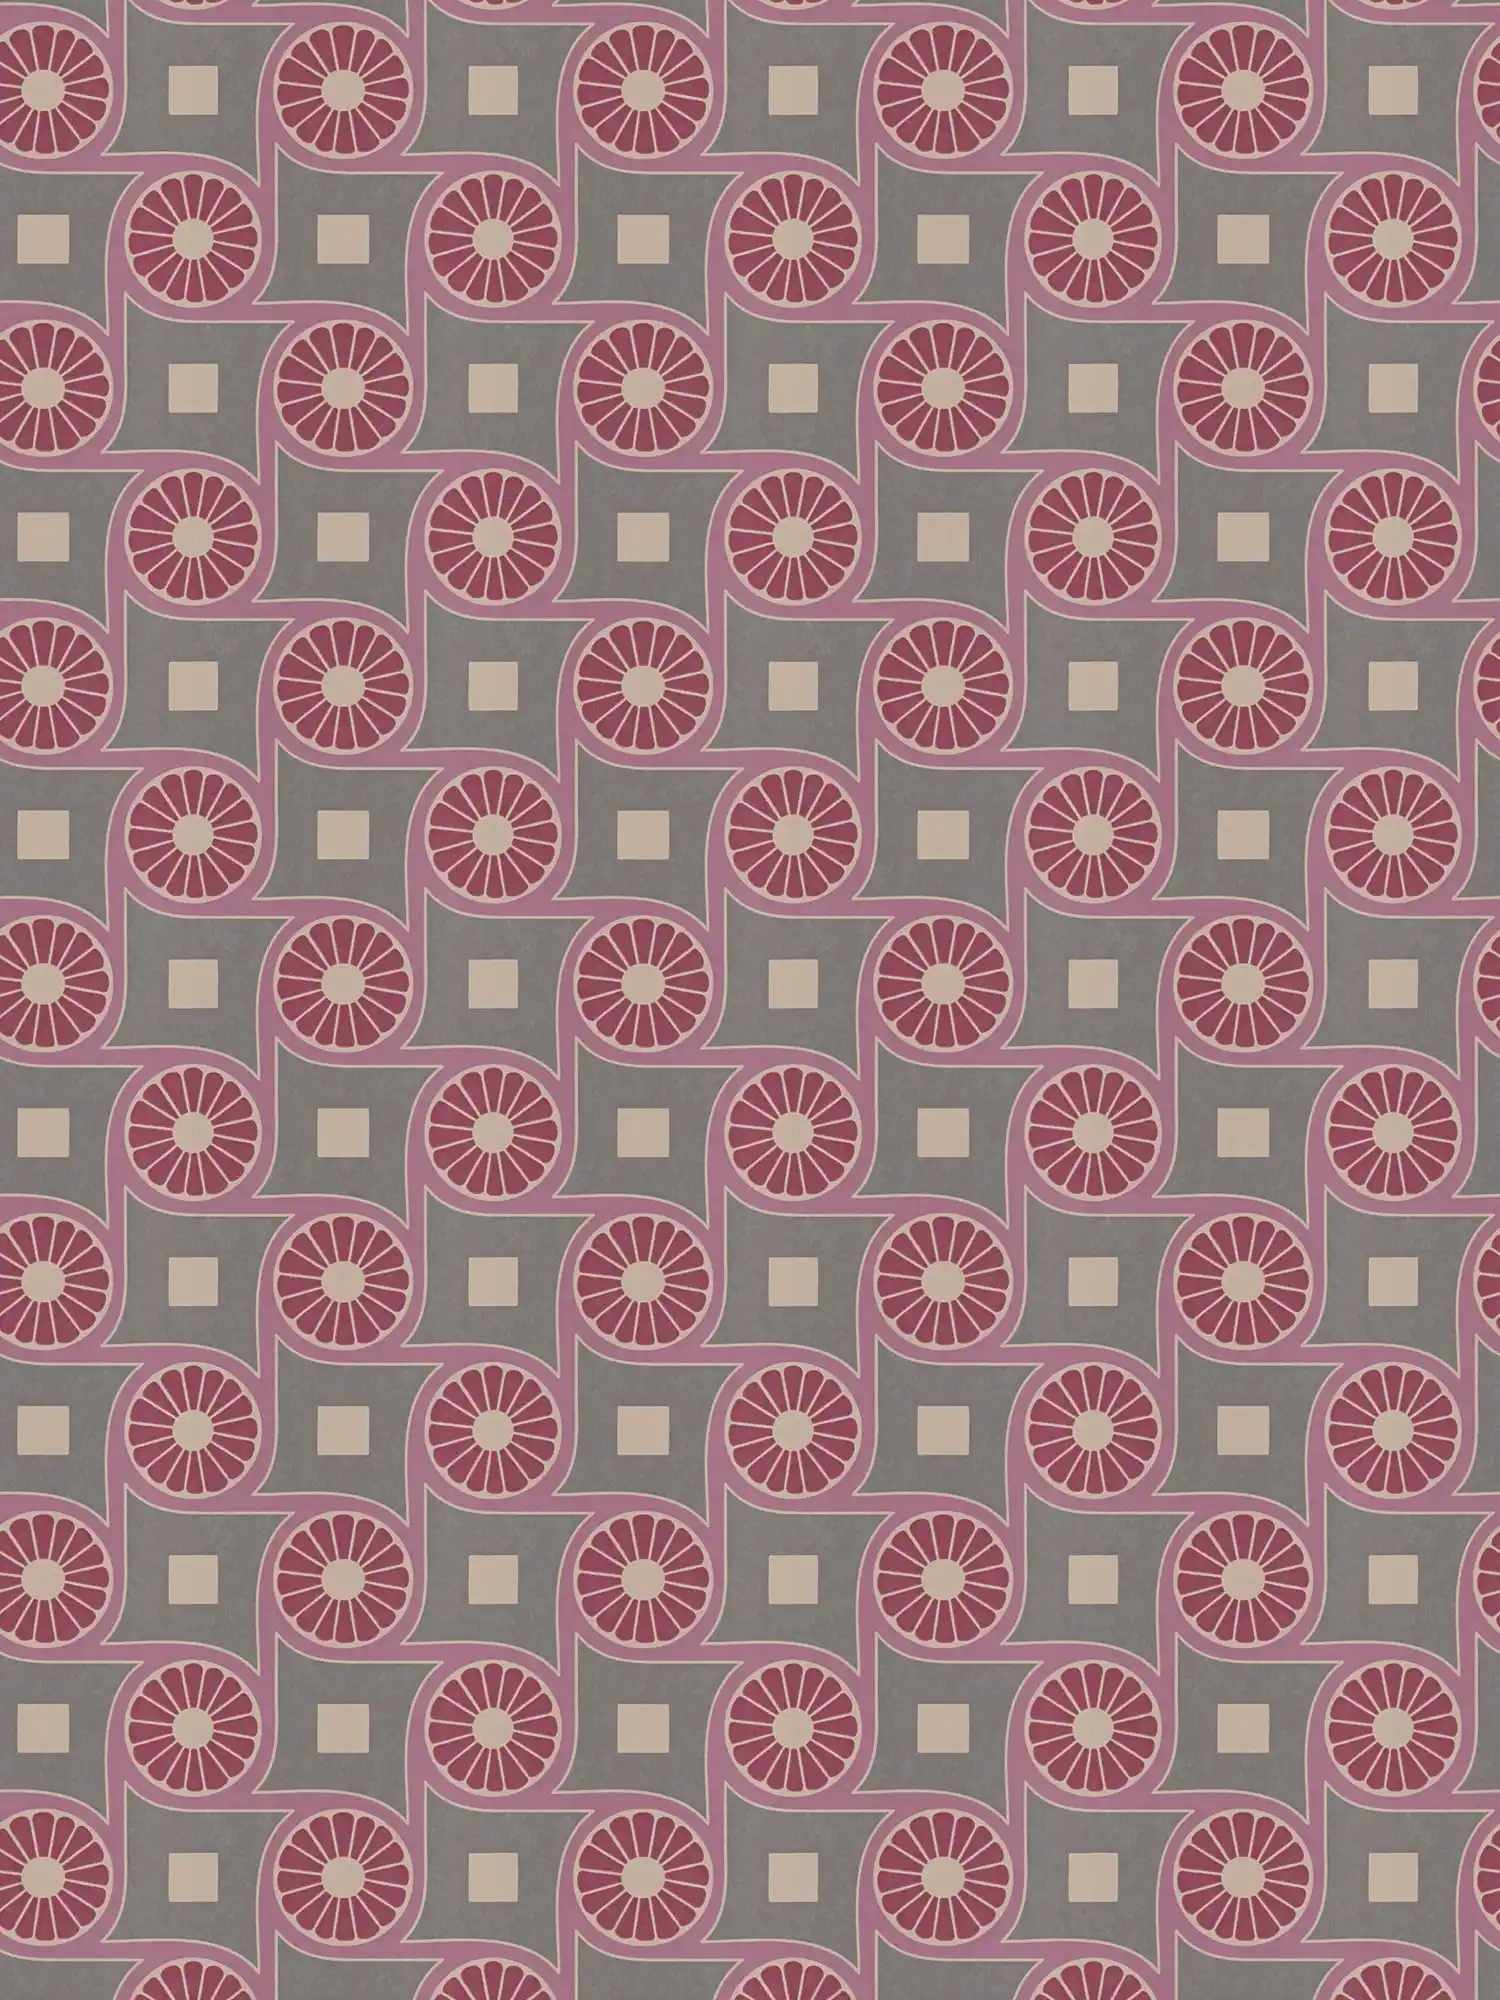         Retro non-woven wallpaper with circle pattern and squares - purple, red, beige
    